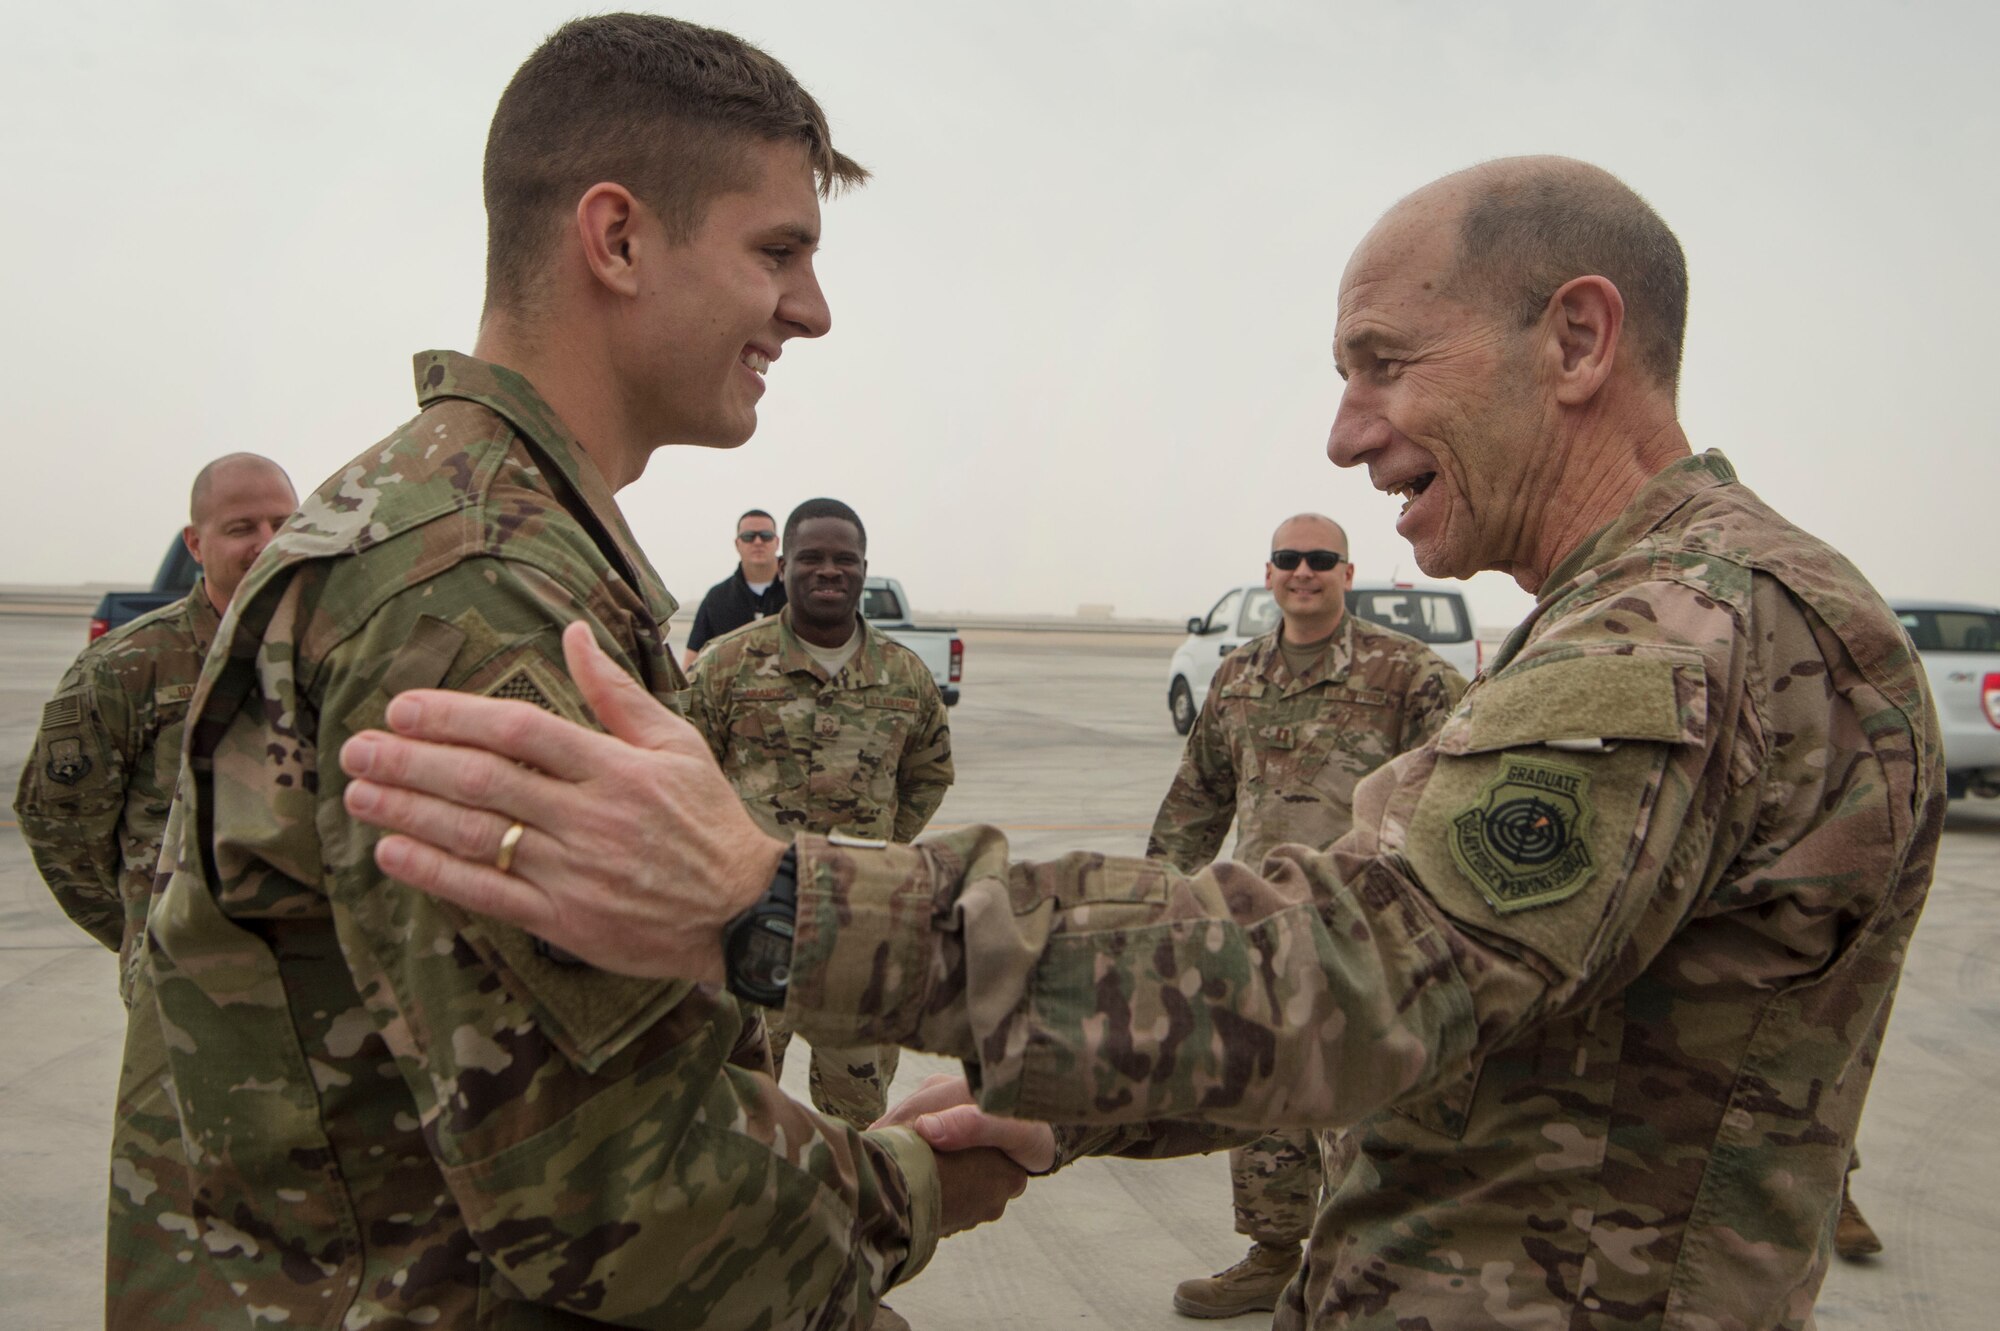 Gen. Mike Holmes, commander of Air Combat Command, visited Airmen to thank them for ‘saying yes’ to serving their nation down range. Holmes and Chief Master Sgt. Frank Batten, ACC command chief, presented coins to several outstanding Airmen during an ACC leadership visit Feb. 11, 2019, at Al Udeid Air Base, Qatar.